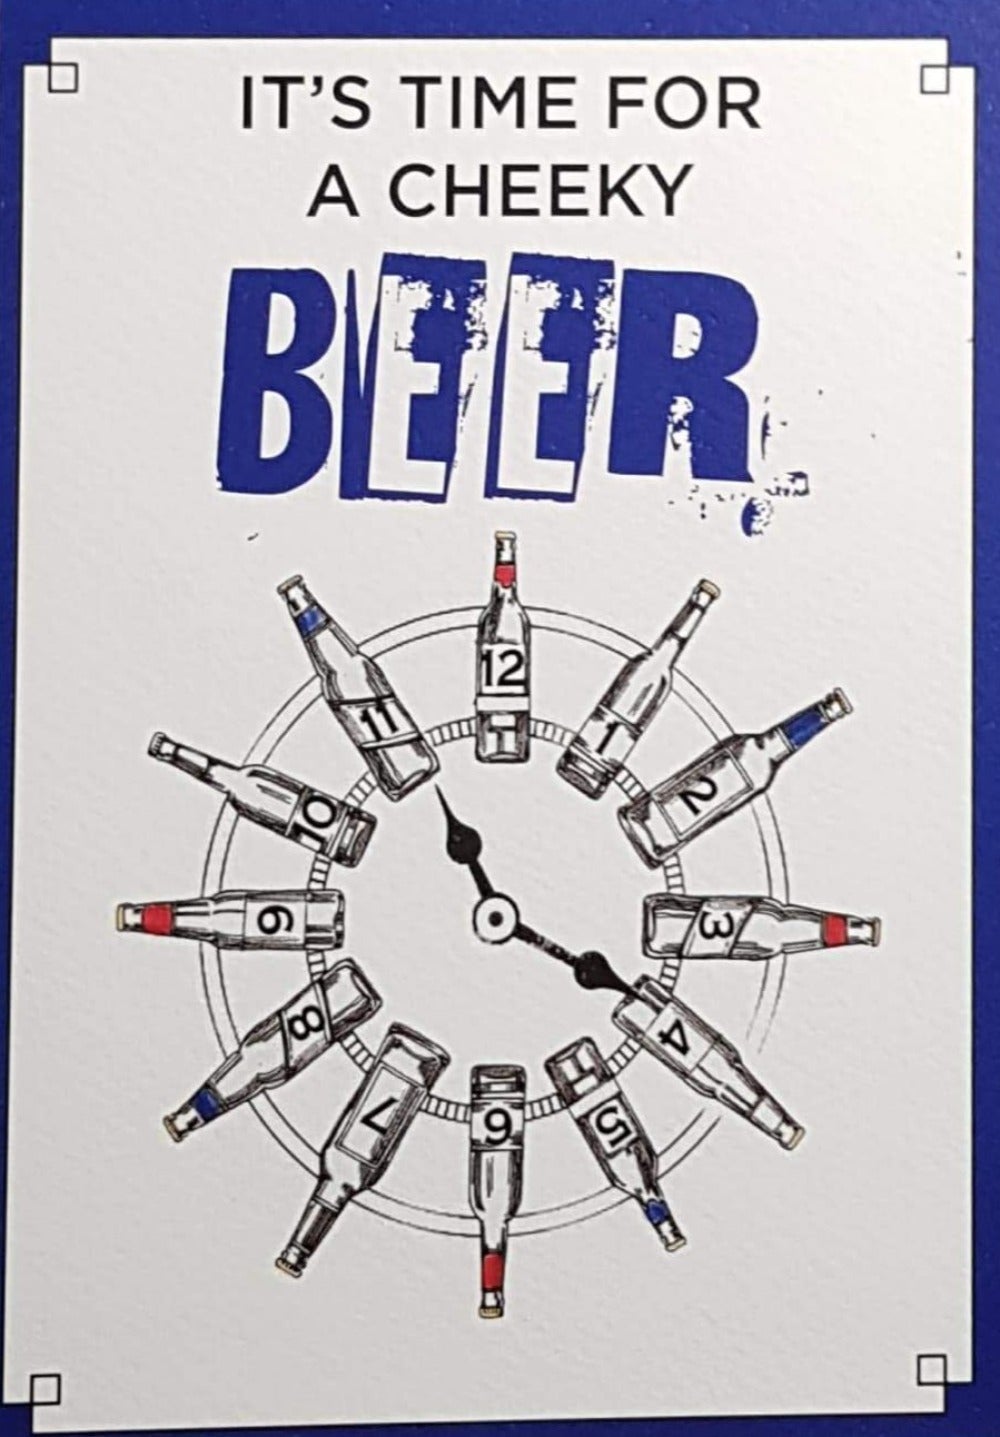 Birthday Card - Humour / Time For A Cheeky Beer